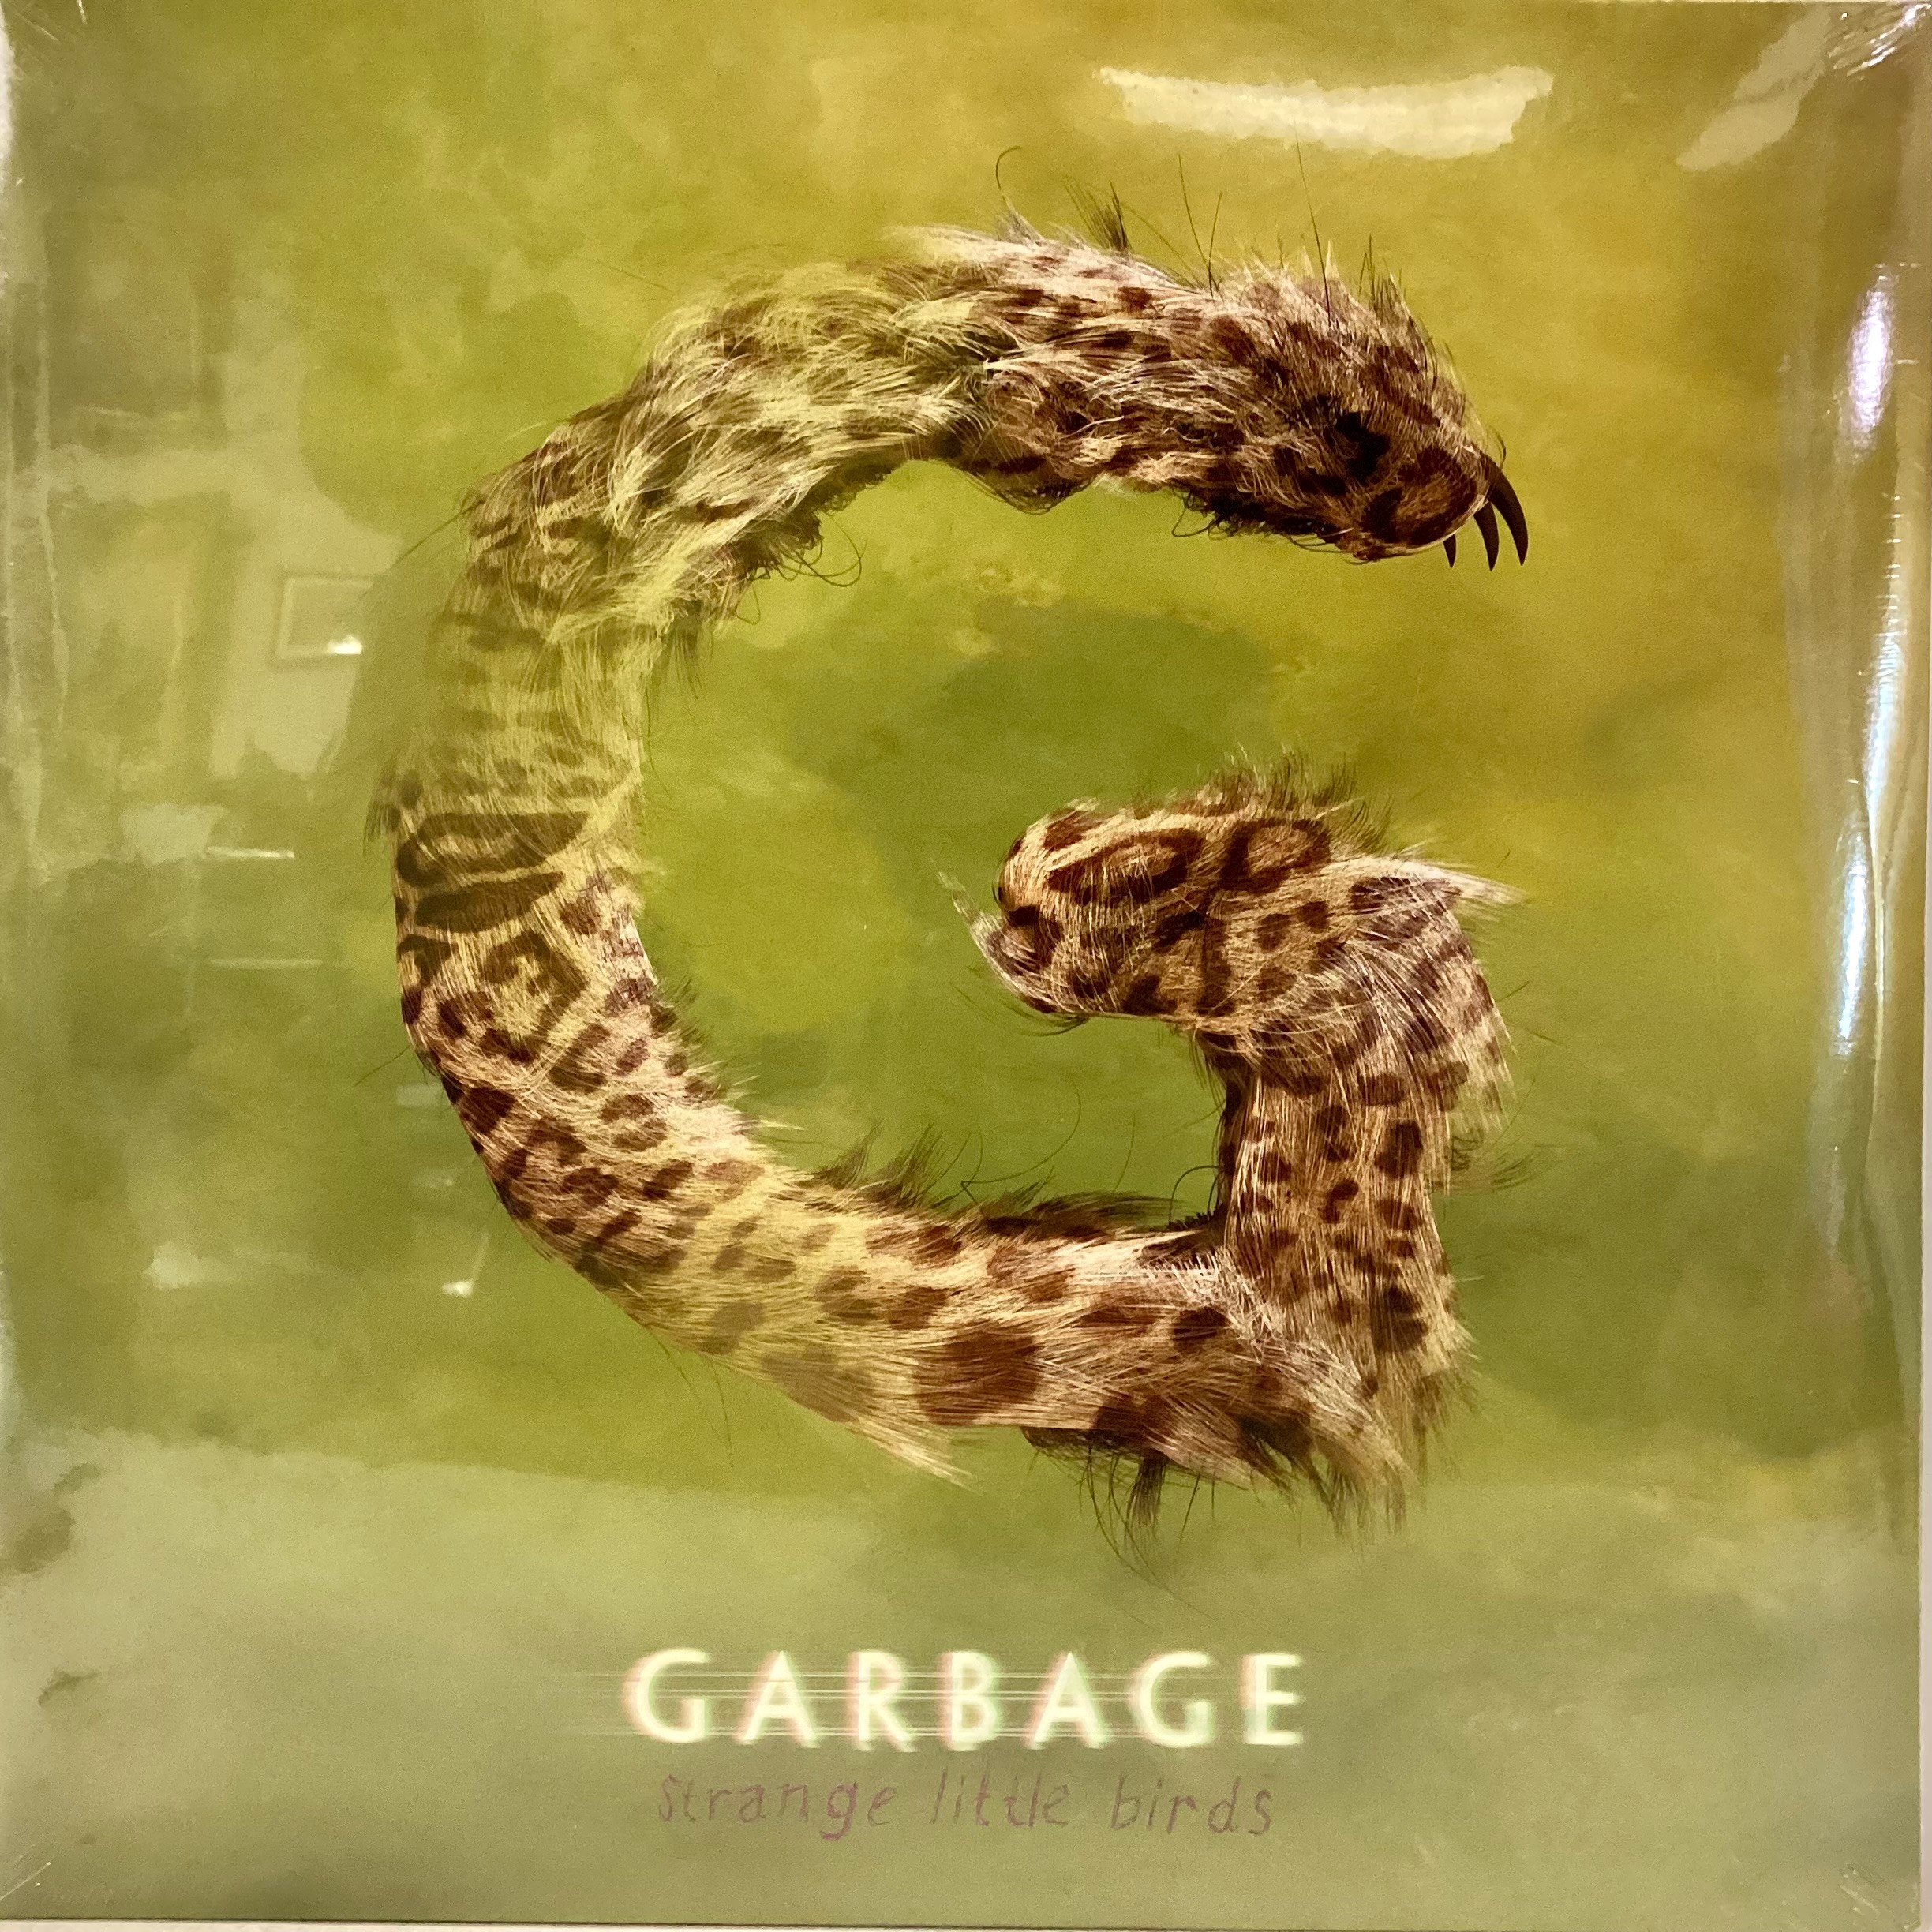 GARBAGE ‘STRANGE LITTLE BIRDS’ NEW SEALED VINYL RECORD LP. This is a 2 record set but tracks fitting